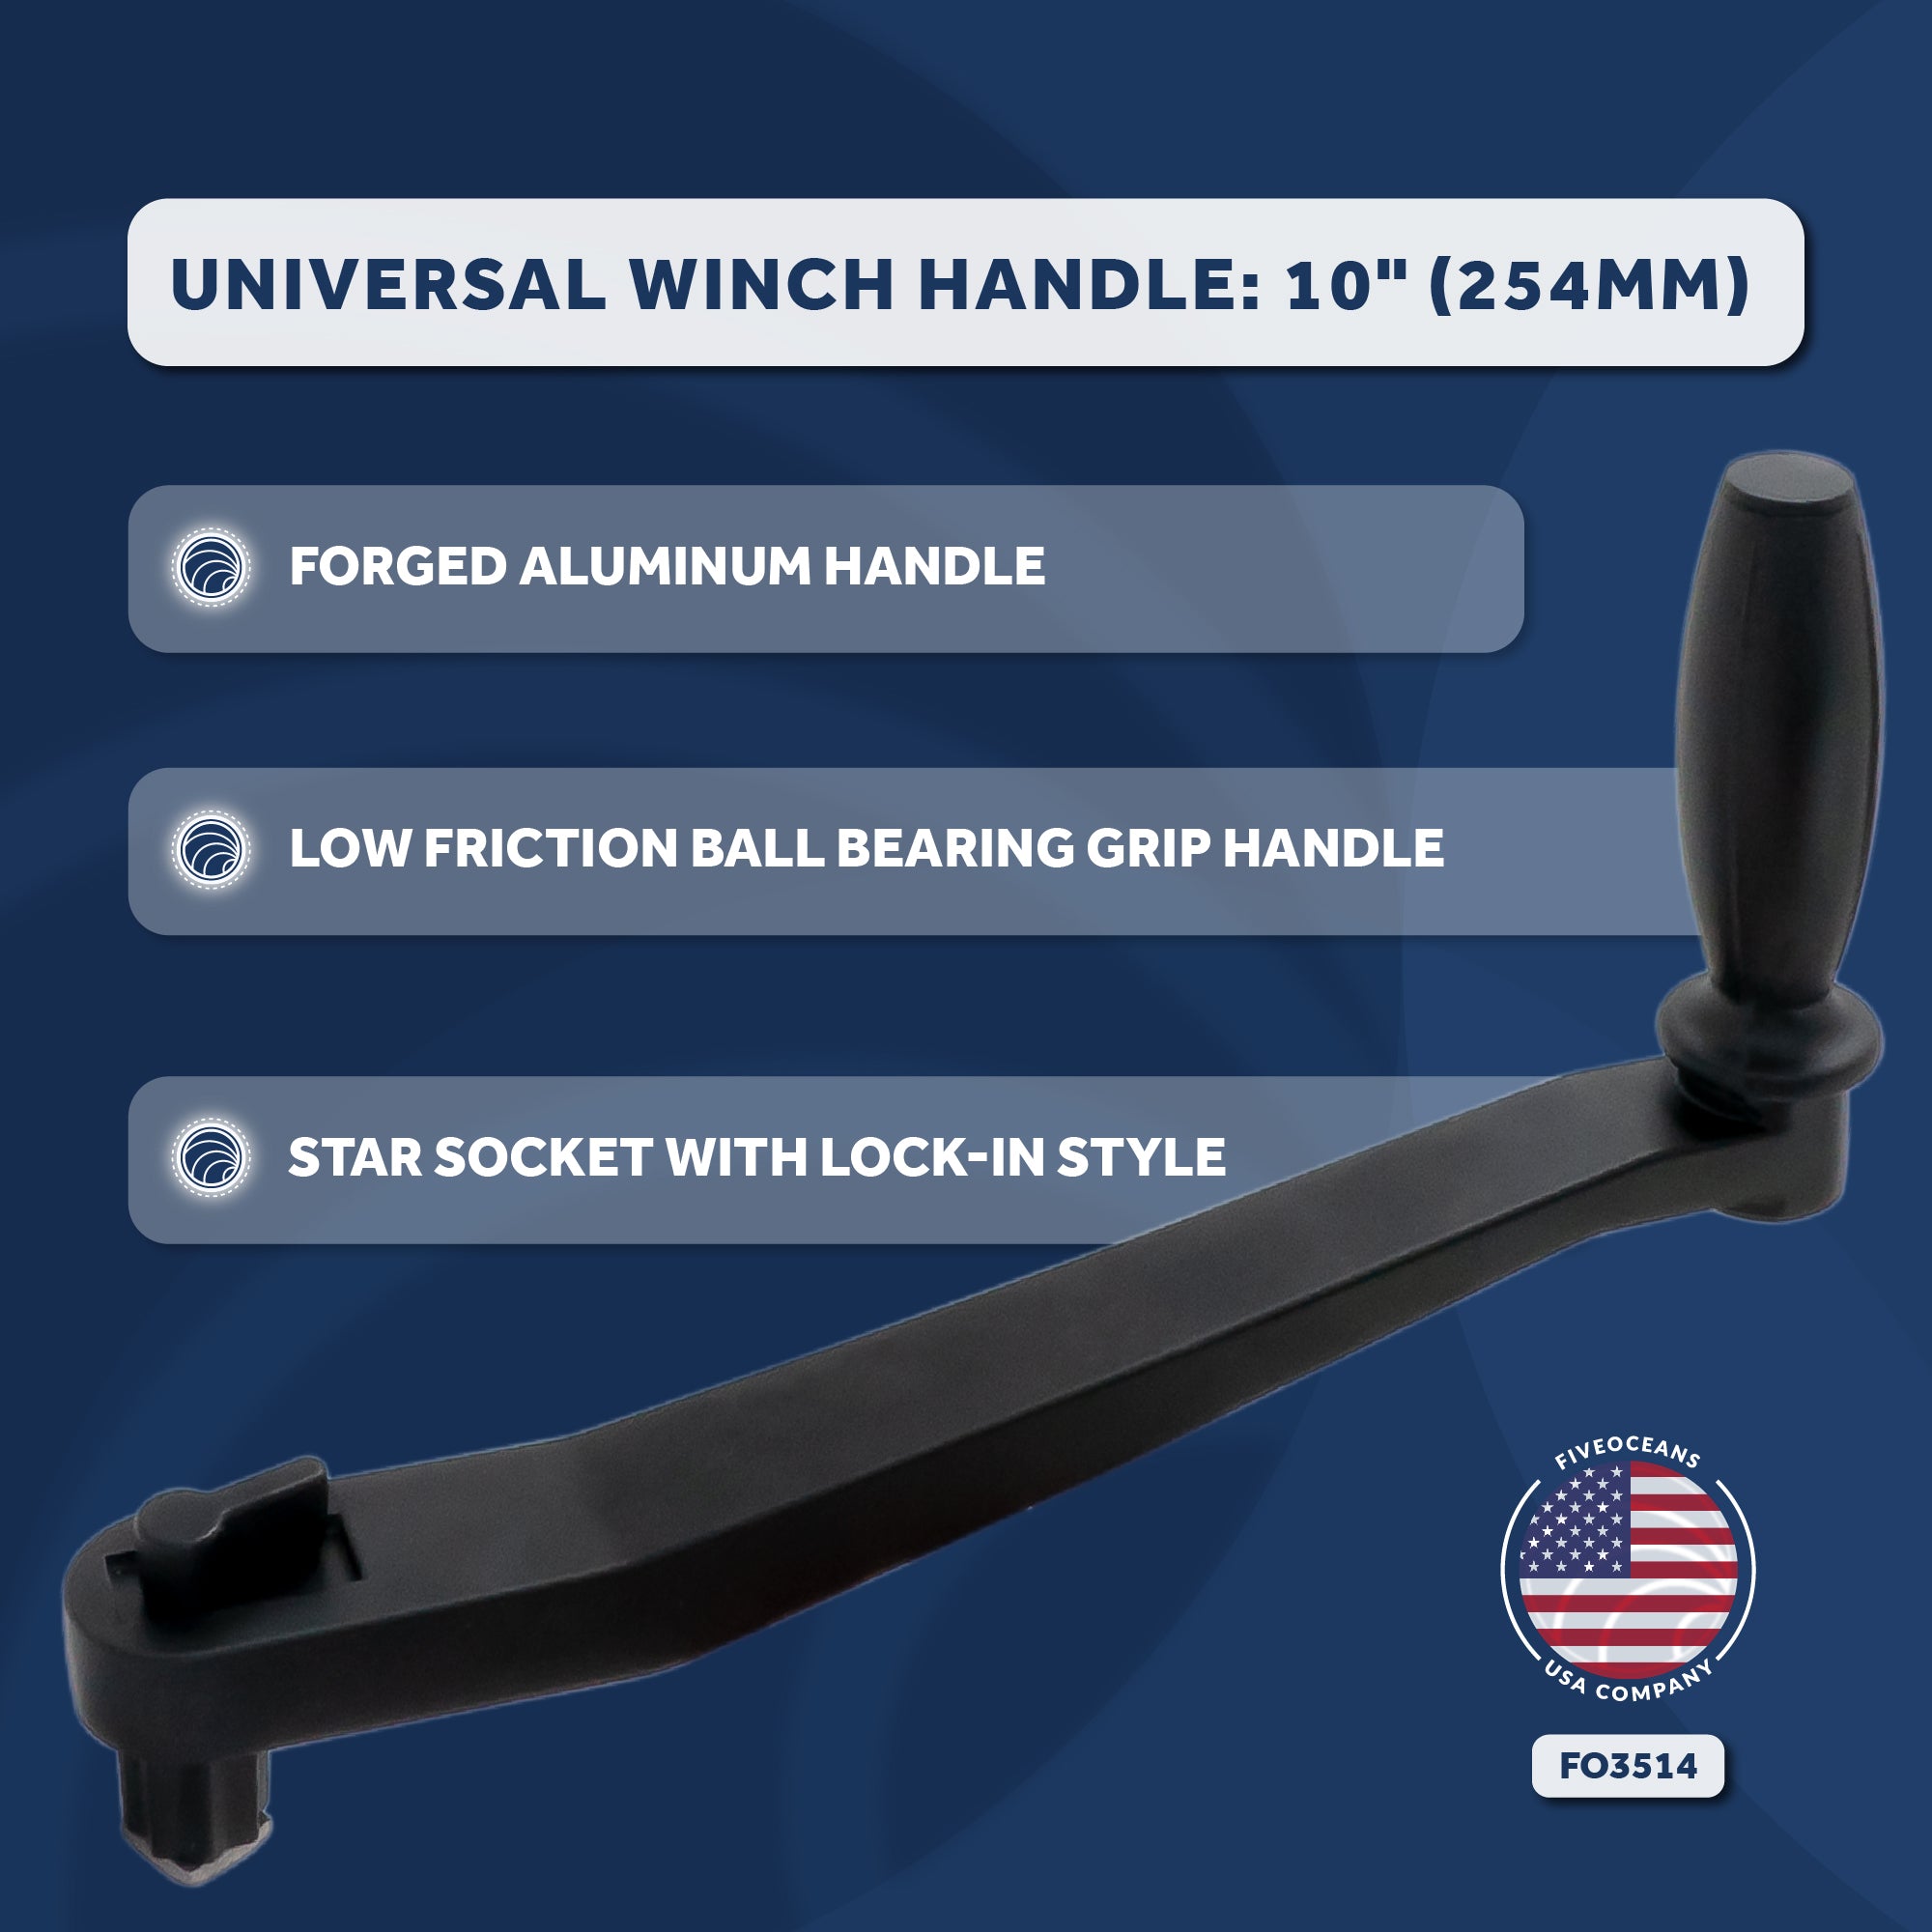 Universal Lock-in Style Winch Handle 10" - FO3514